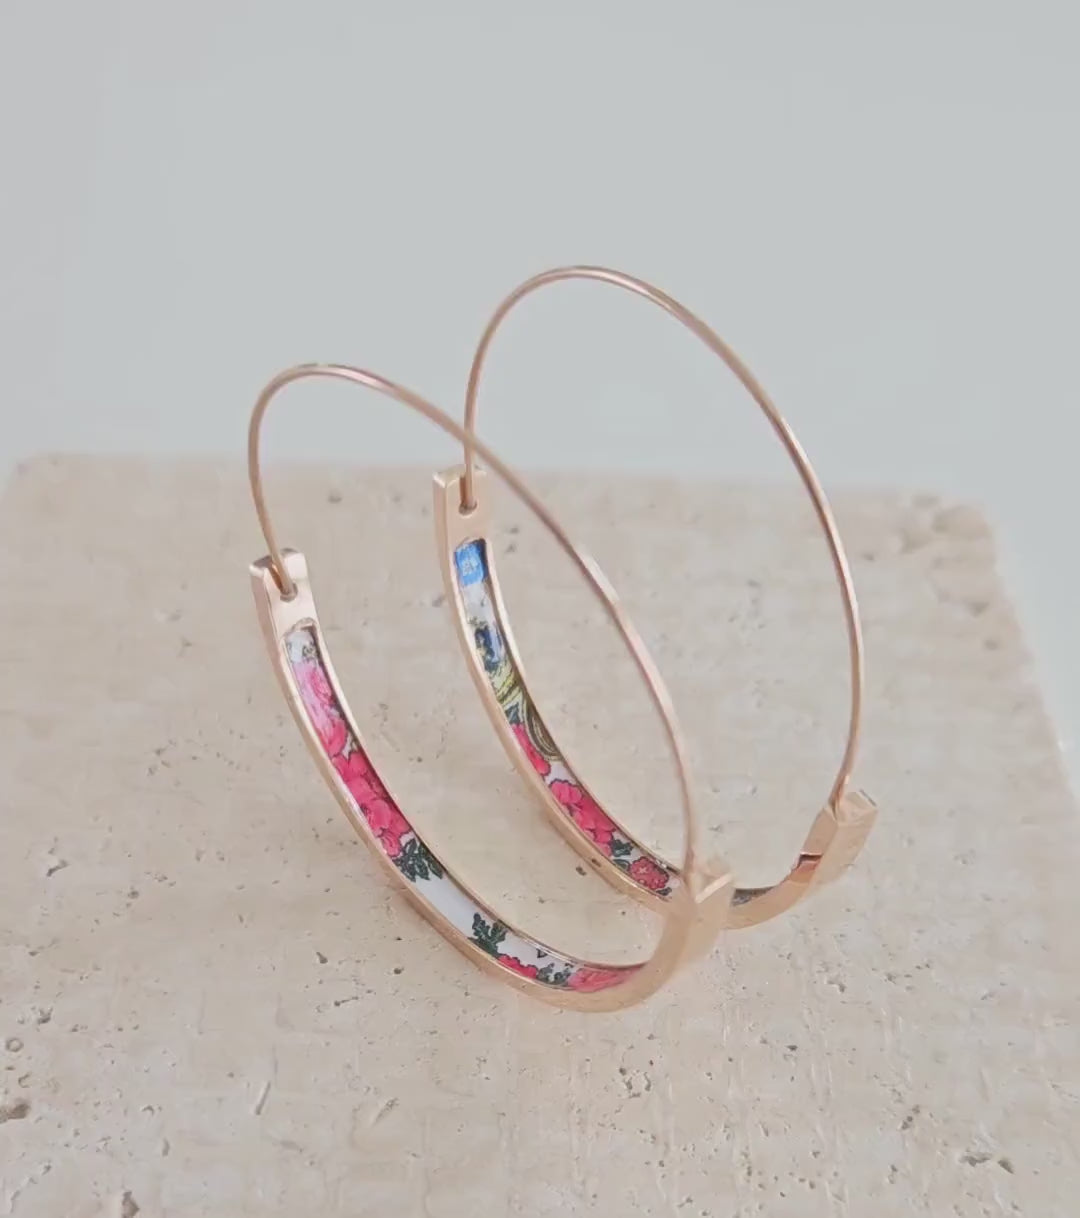 ROSE Gold Portugal Viana Red HOOP Tile Earring STEEL Folklore Lightweight Thin Wire Hoop Gold Historical Jewelry Women Rose Gift Traditional